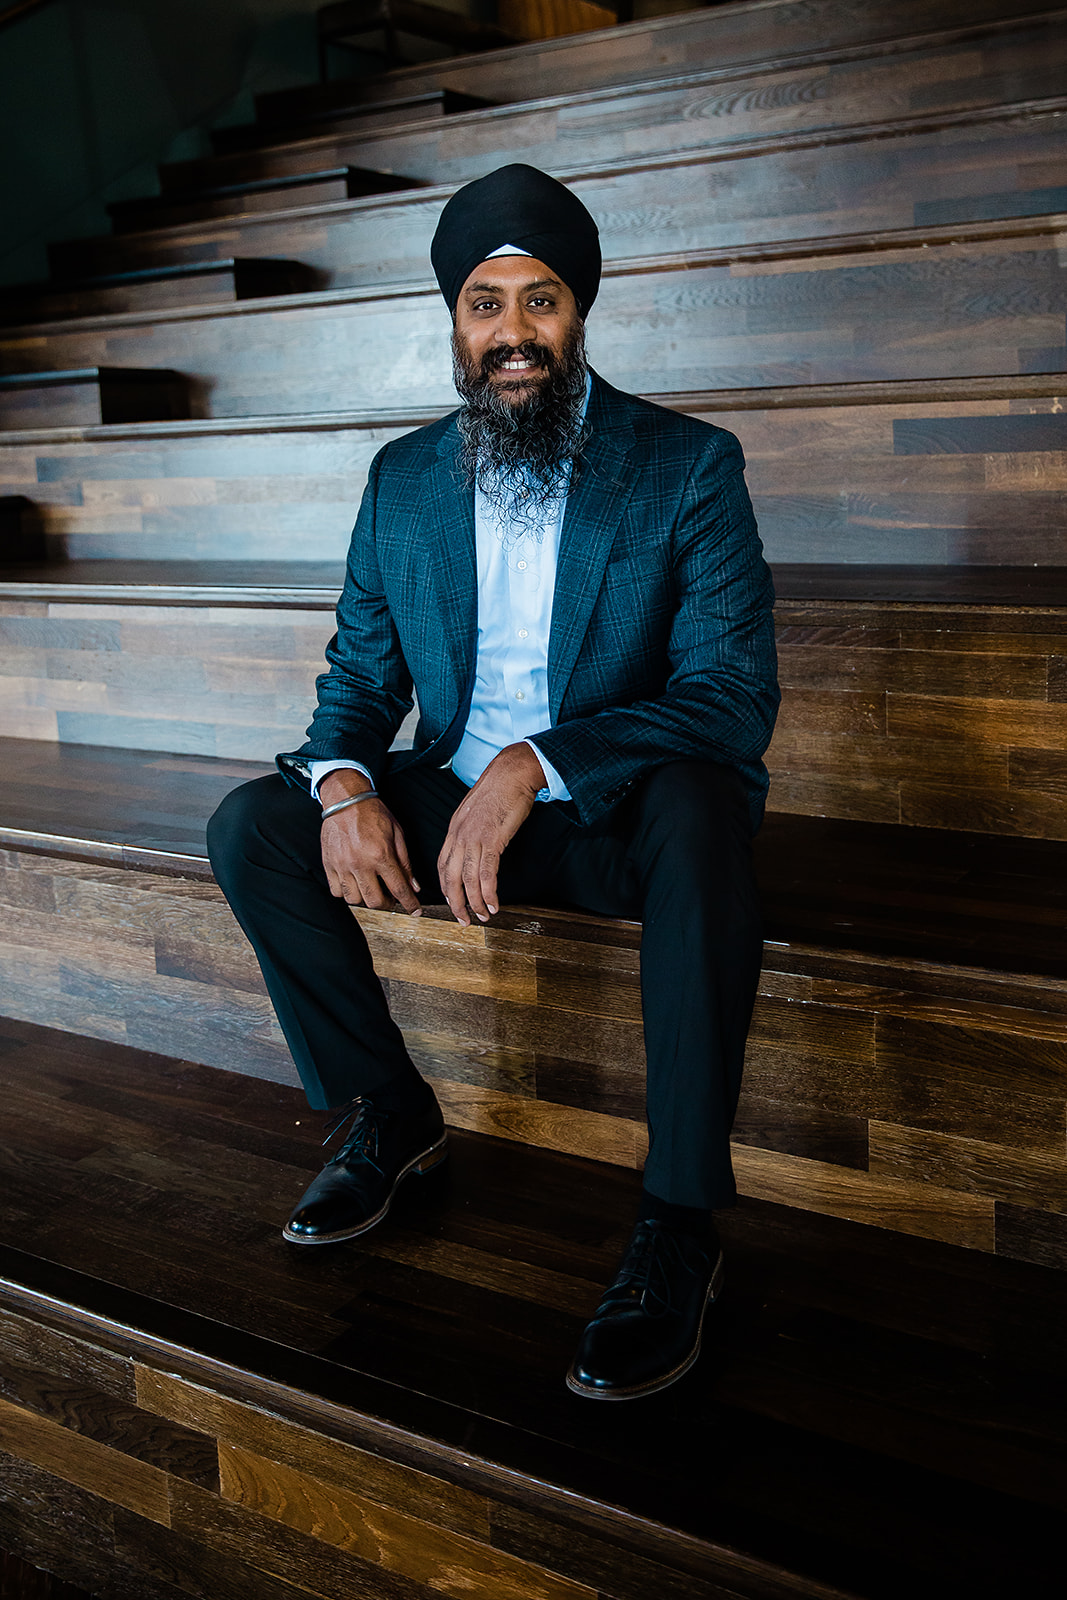 Photo: When Jaipal Singh, principal and founding owner of Chaatrik Architecture and Urban Design based in Cincinnati, Ohio, joined AMI, he was a one-man show. Now, a year later, he has 5 employees, a deep pipeline, and the team is working on several large contracts for 2022 and beyond.